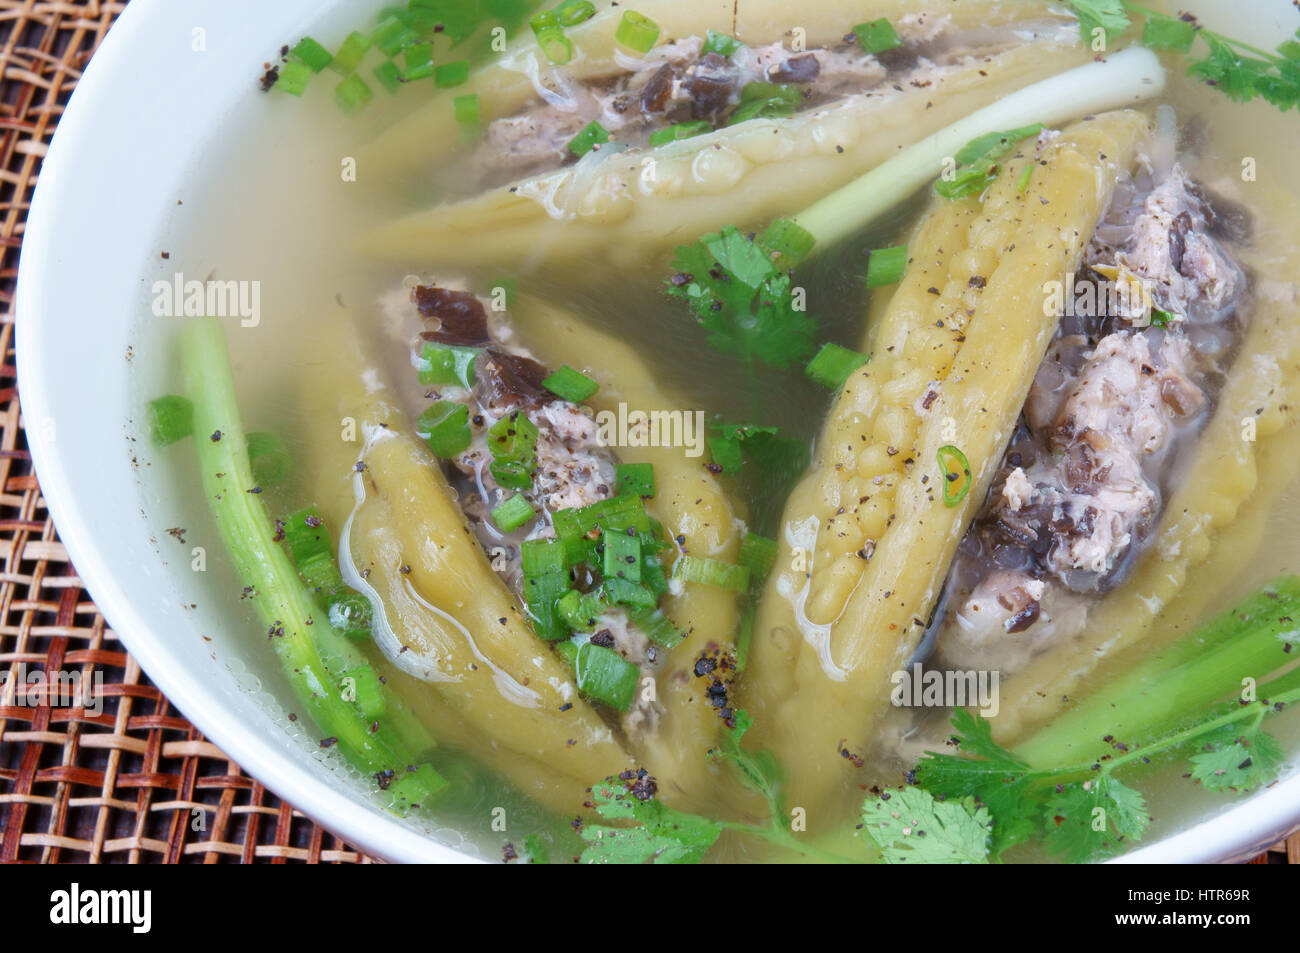 Vietnamese Food Soup Of Bitter Melon Stuffed With Ground Meat A Nutrition Popular Dish In Vietnam Bitter Gourd Rich Vitamin Can Anti Diabetes Stock Photo Alamy